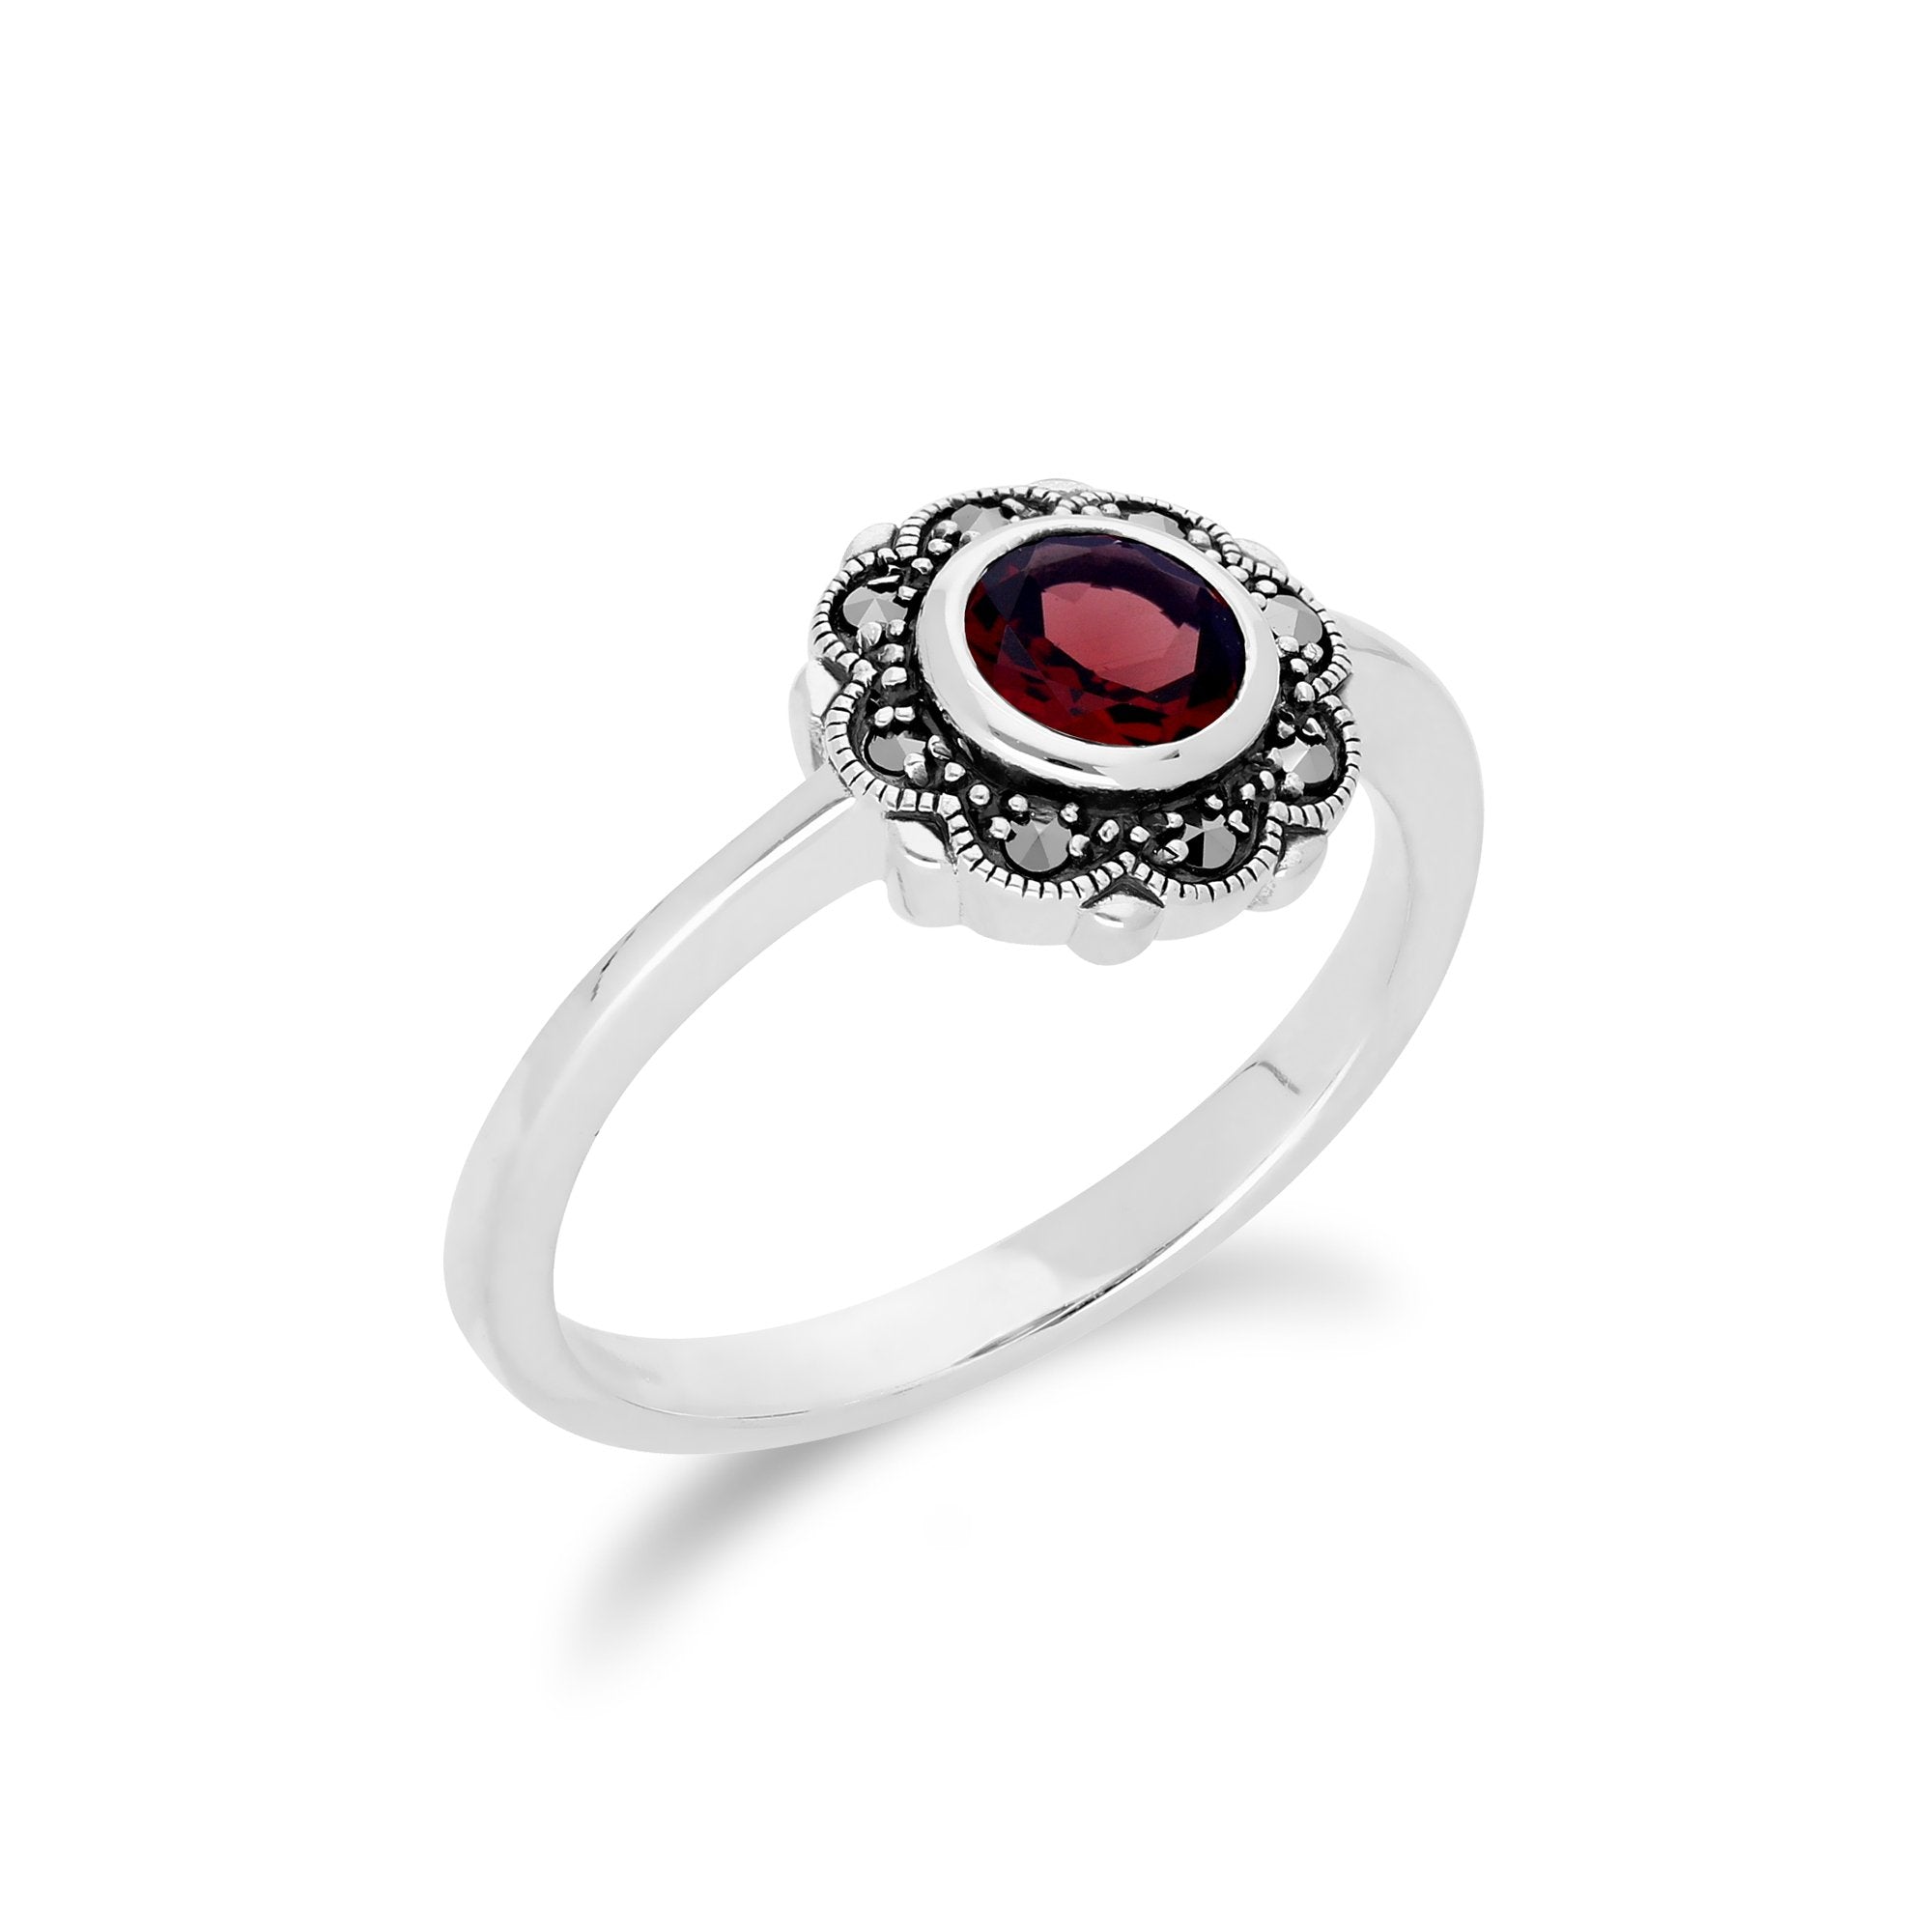 Floral Round Garnet & Marcasite Halo Ring in 925 Sterling Silver